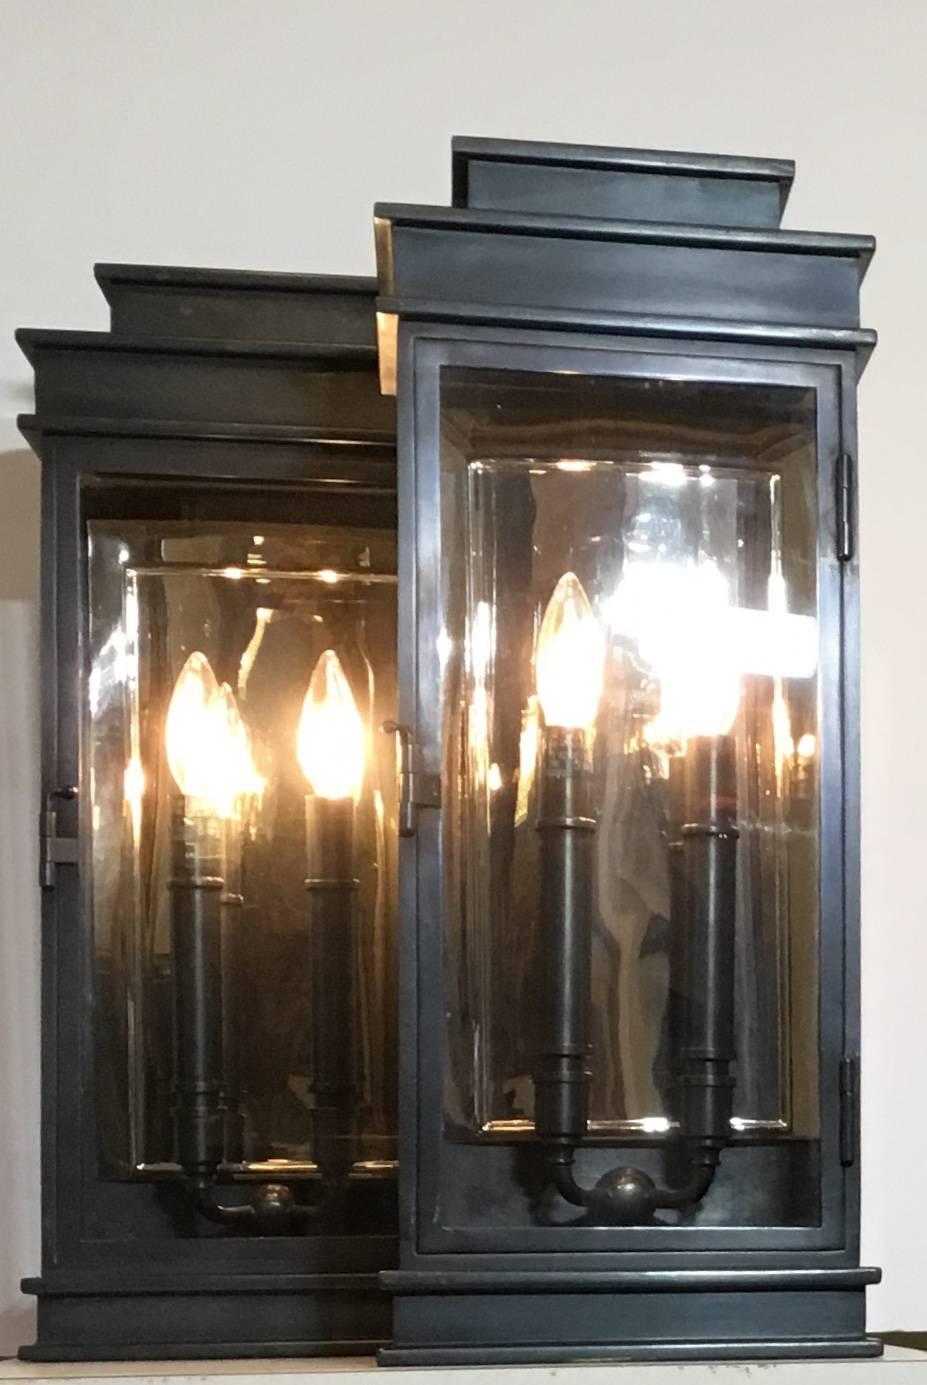 Pair of extra ordinary architectural lantern, fine quality custom-made from brass two 60/watts light
With laminate plat inside to enhance the light, easy to open door.
Suitable for wet locations, up to US code and UL approved.
Great quality pair